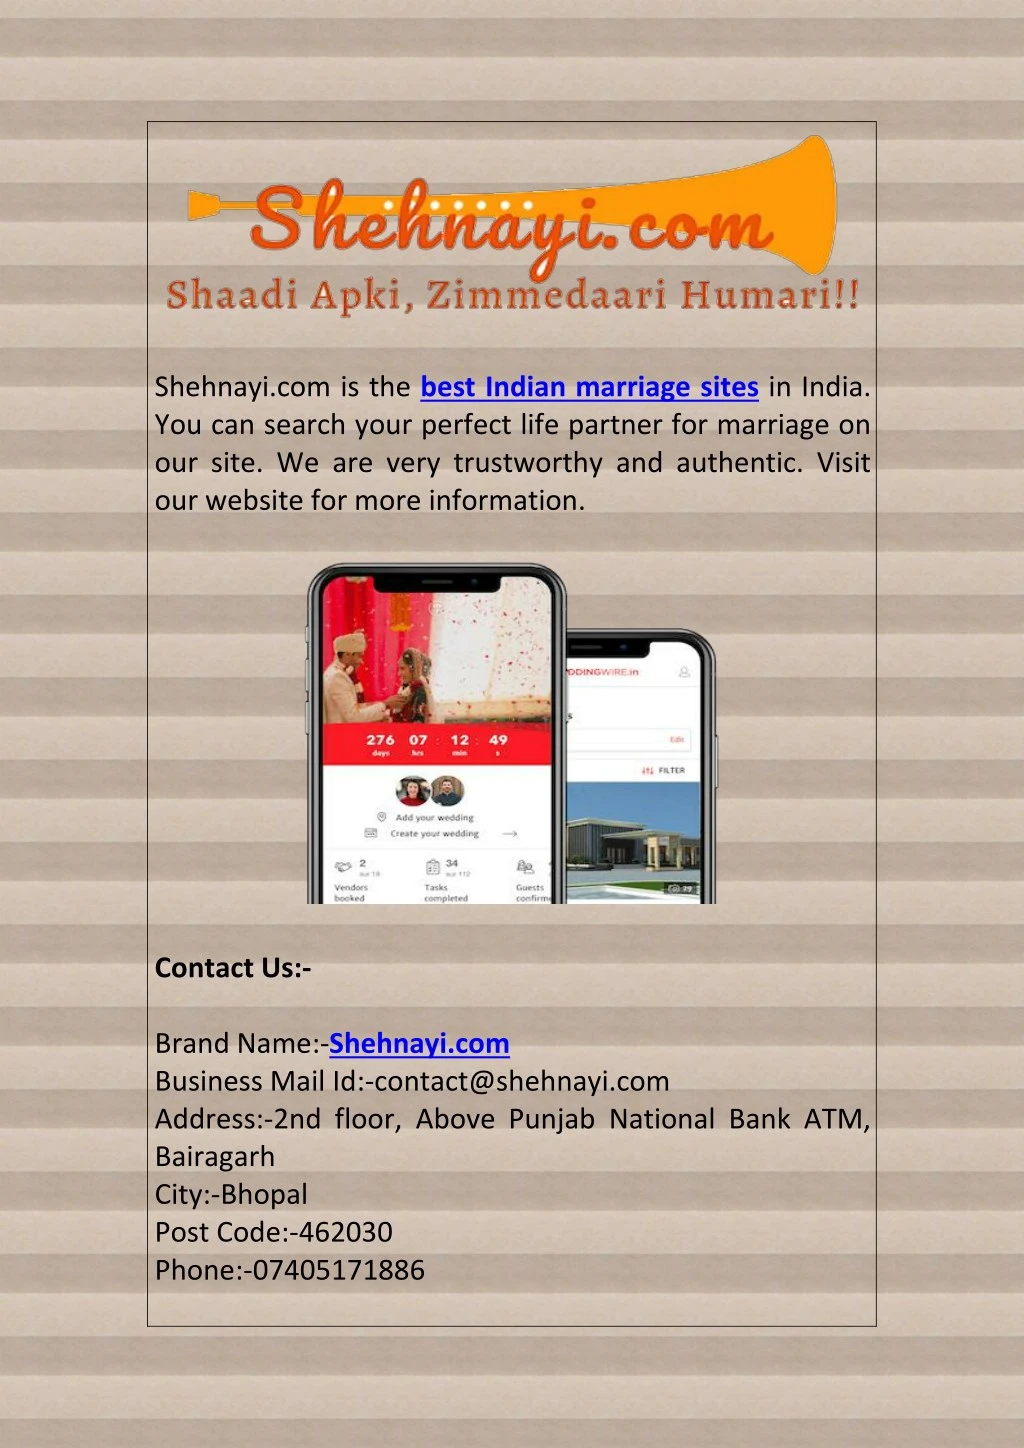 shehnayi com is the best indian marriage sites